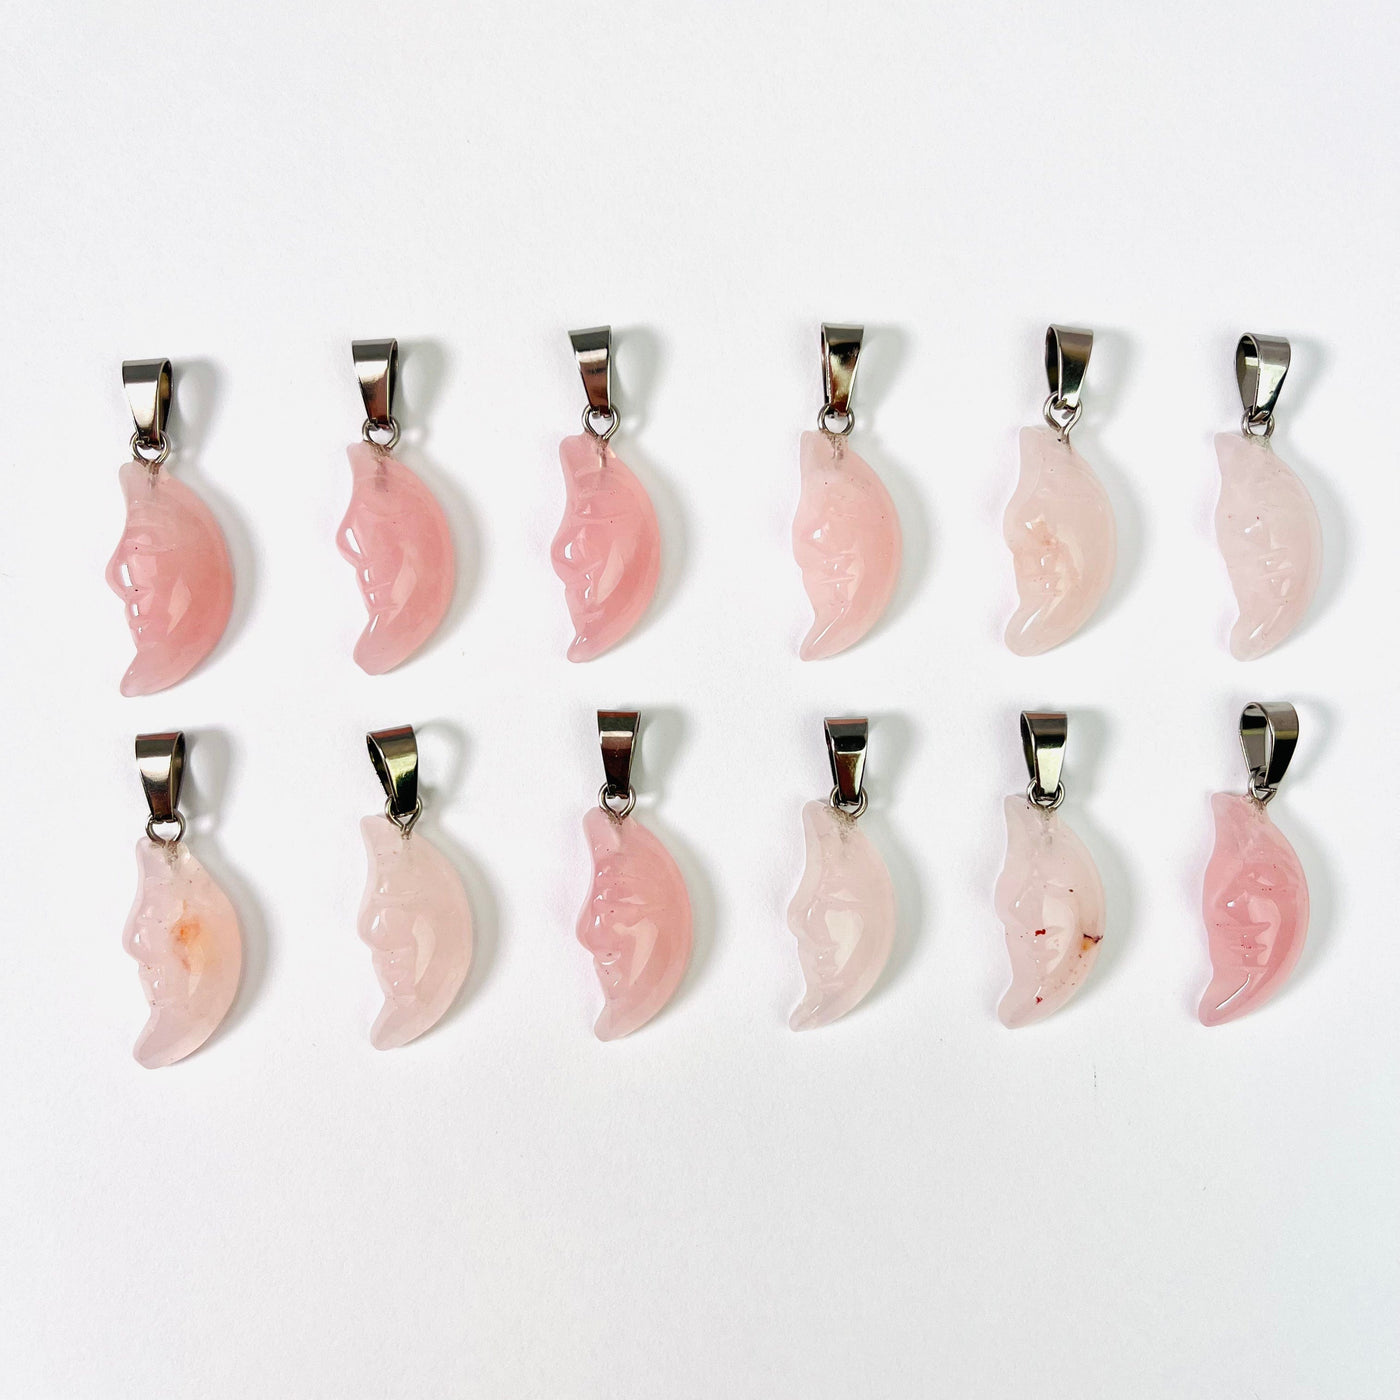 Twelve Rose Quartz Crescent Moon Gemstones Pendants lined up in two rows on a white surface.